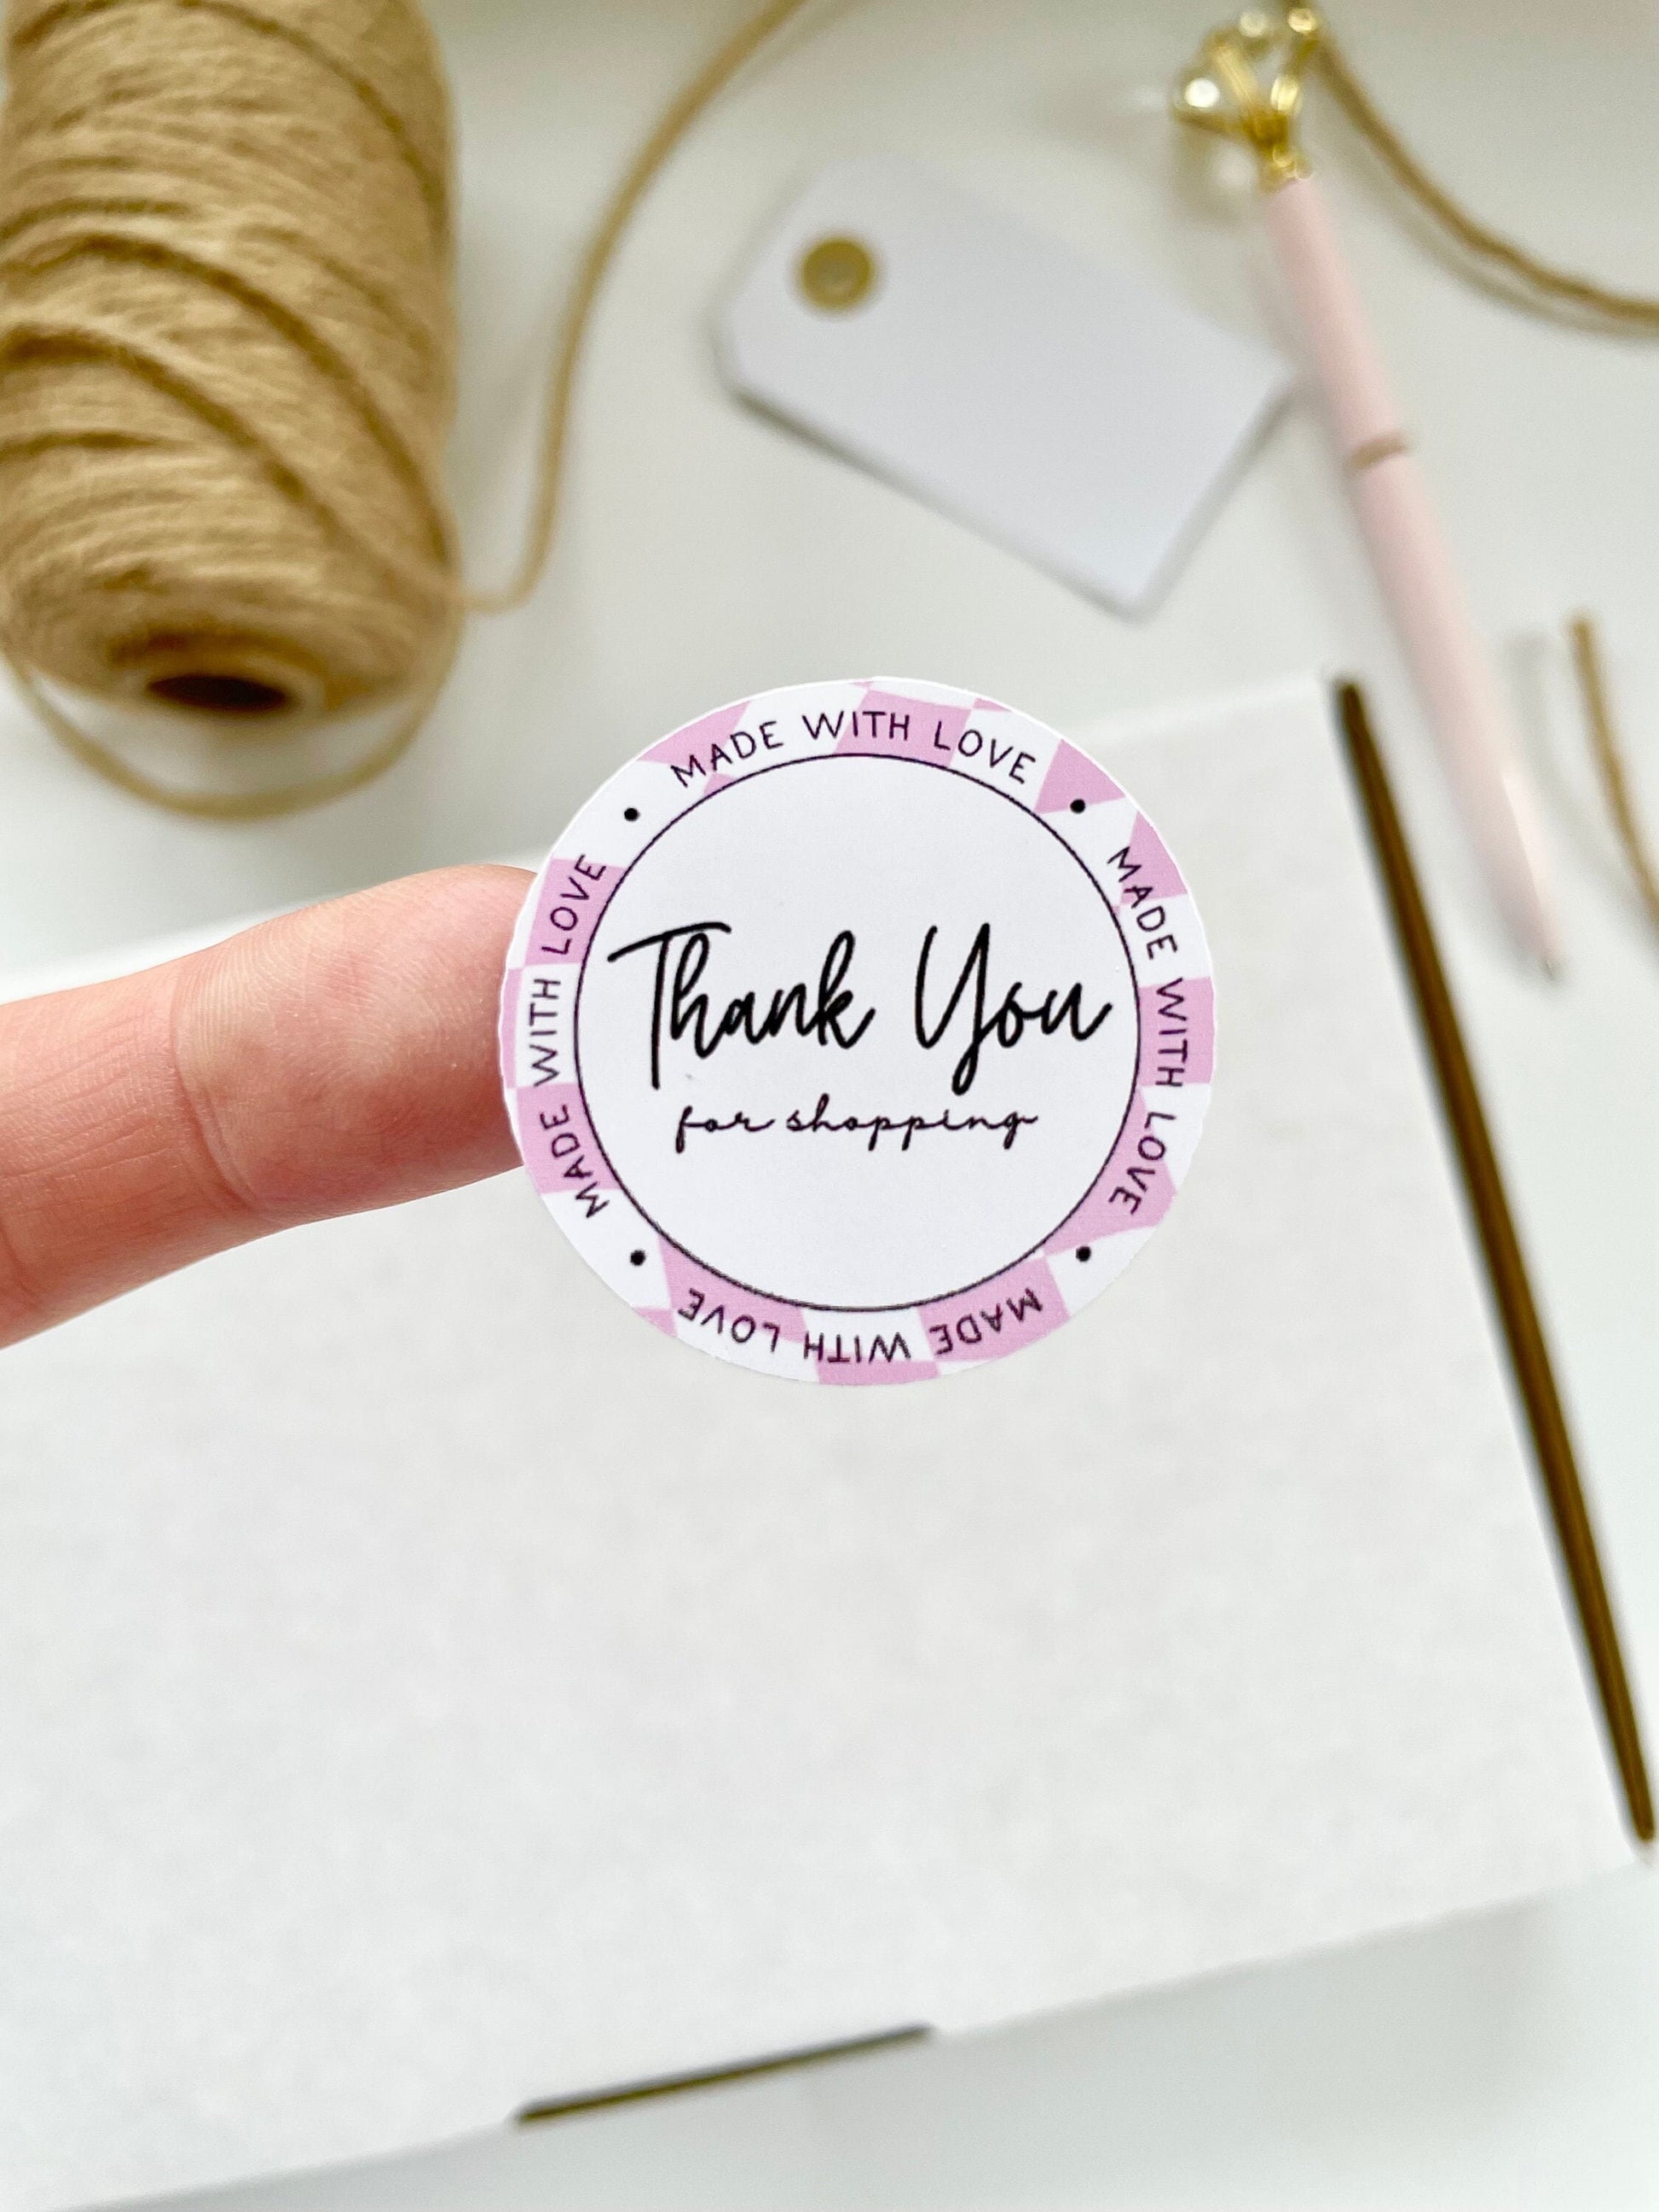 Thank you for order retro label | thank you business sticker | 38mm stickers | small business product label | packaging handmade